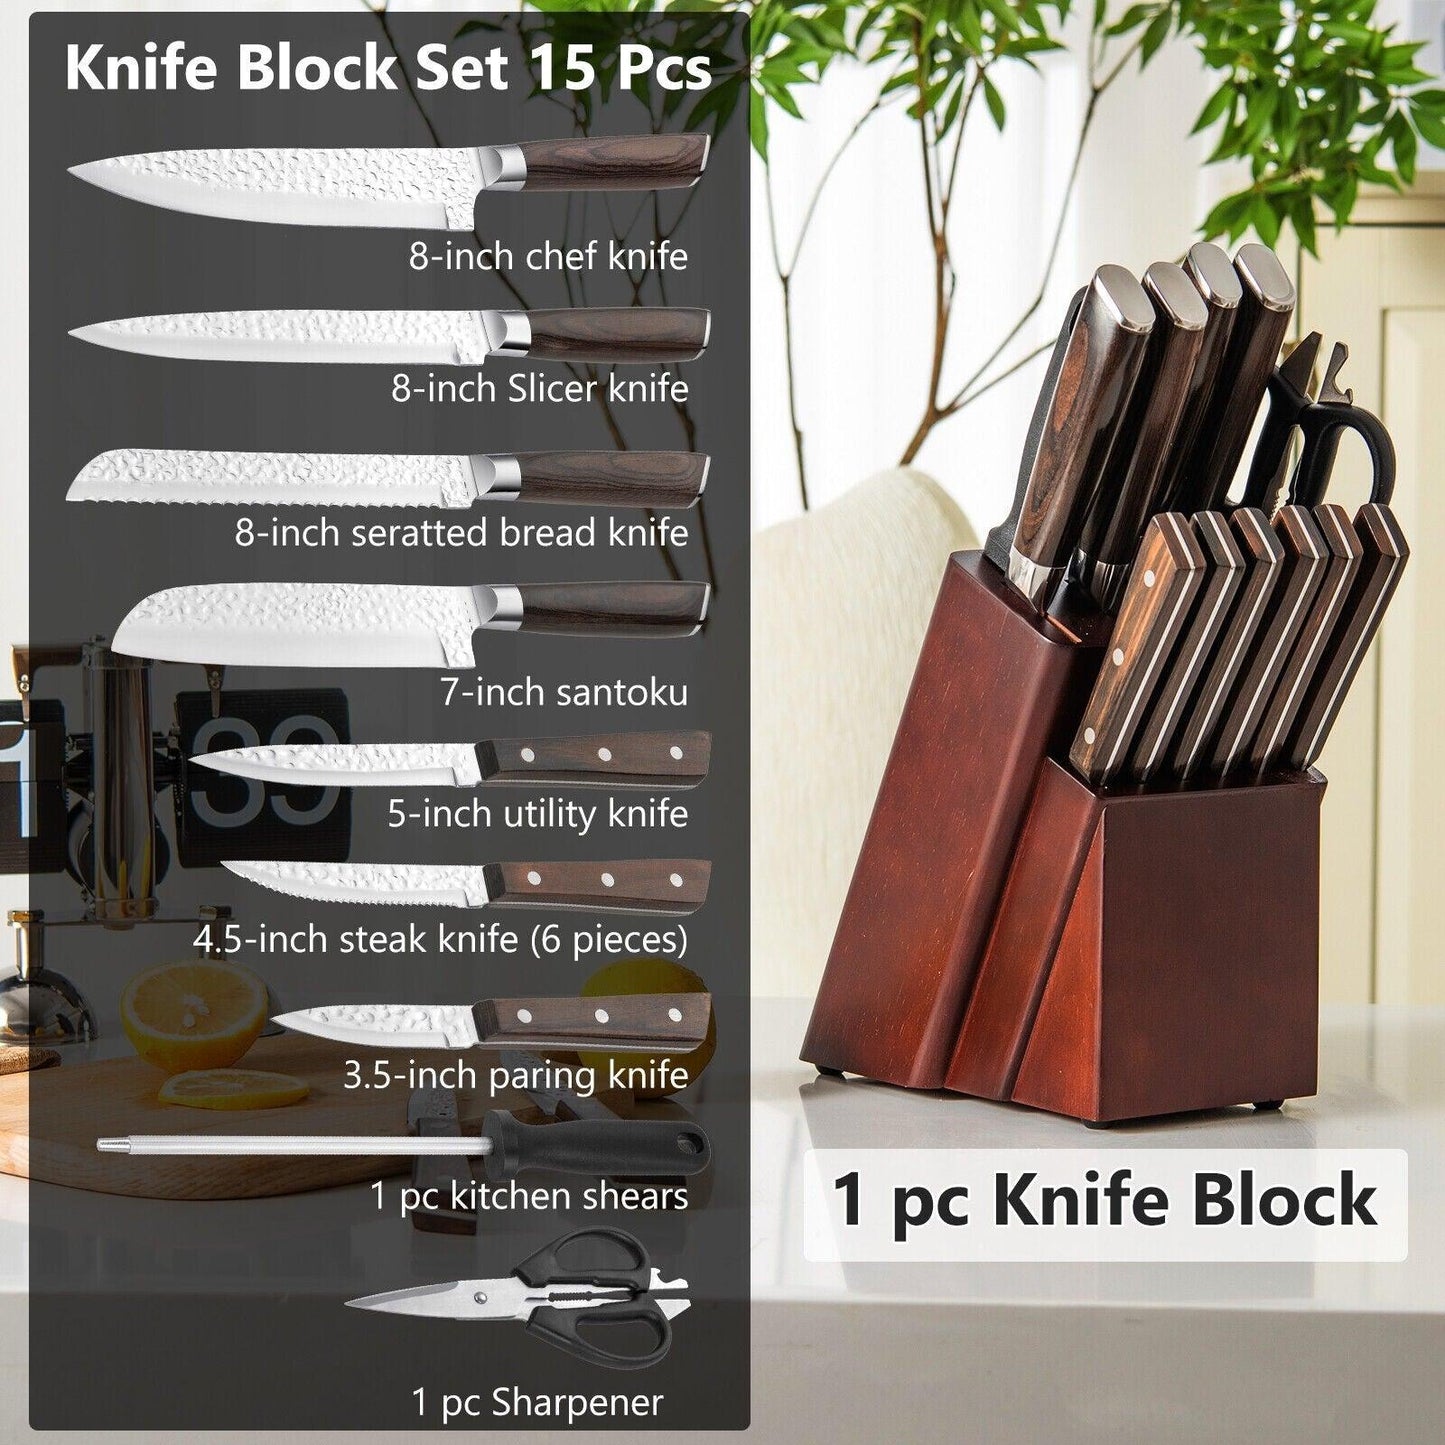 Costway 15 Pieces Stainless Steel Knife Block Set 95032687 with Ergonomic Handle - YOURISHOP.COM